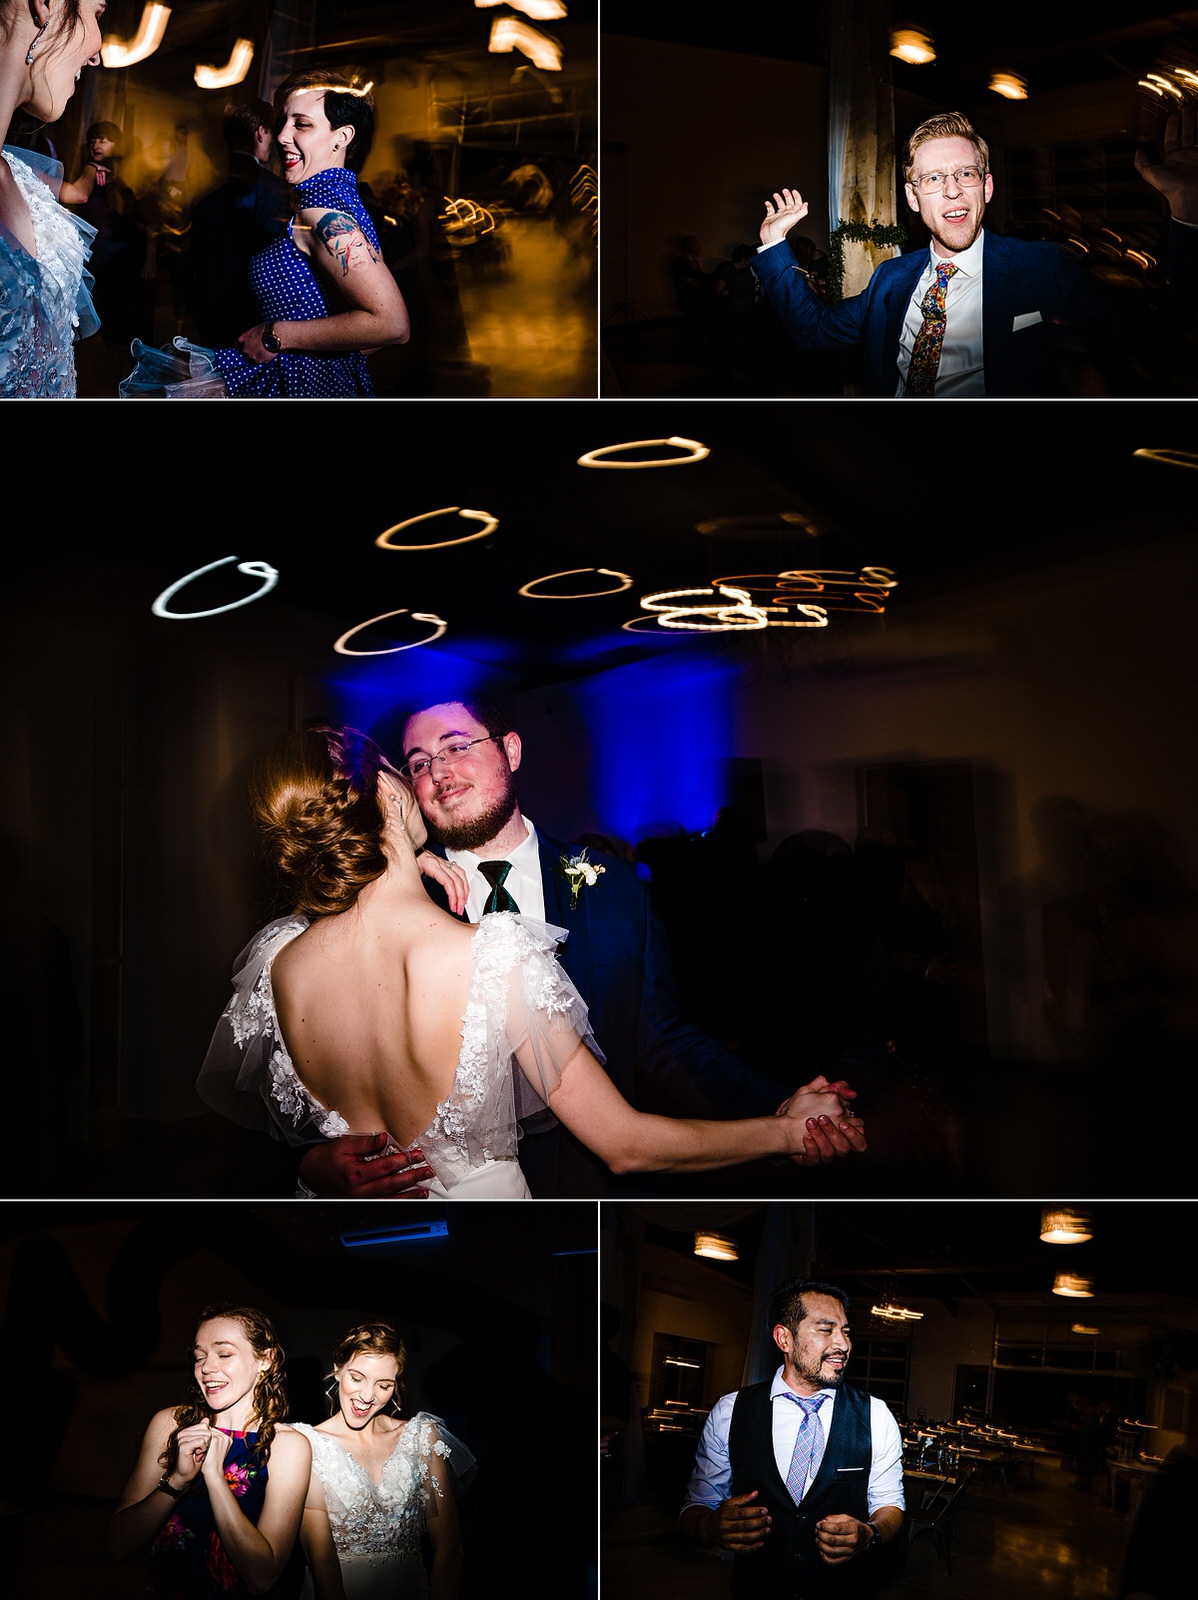 Fun wedding reception at The Meadows Raleigh by Raleigh wedding photographers